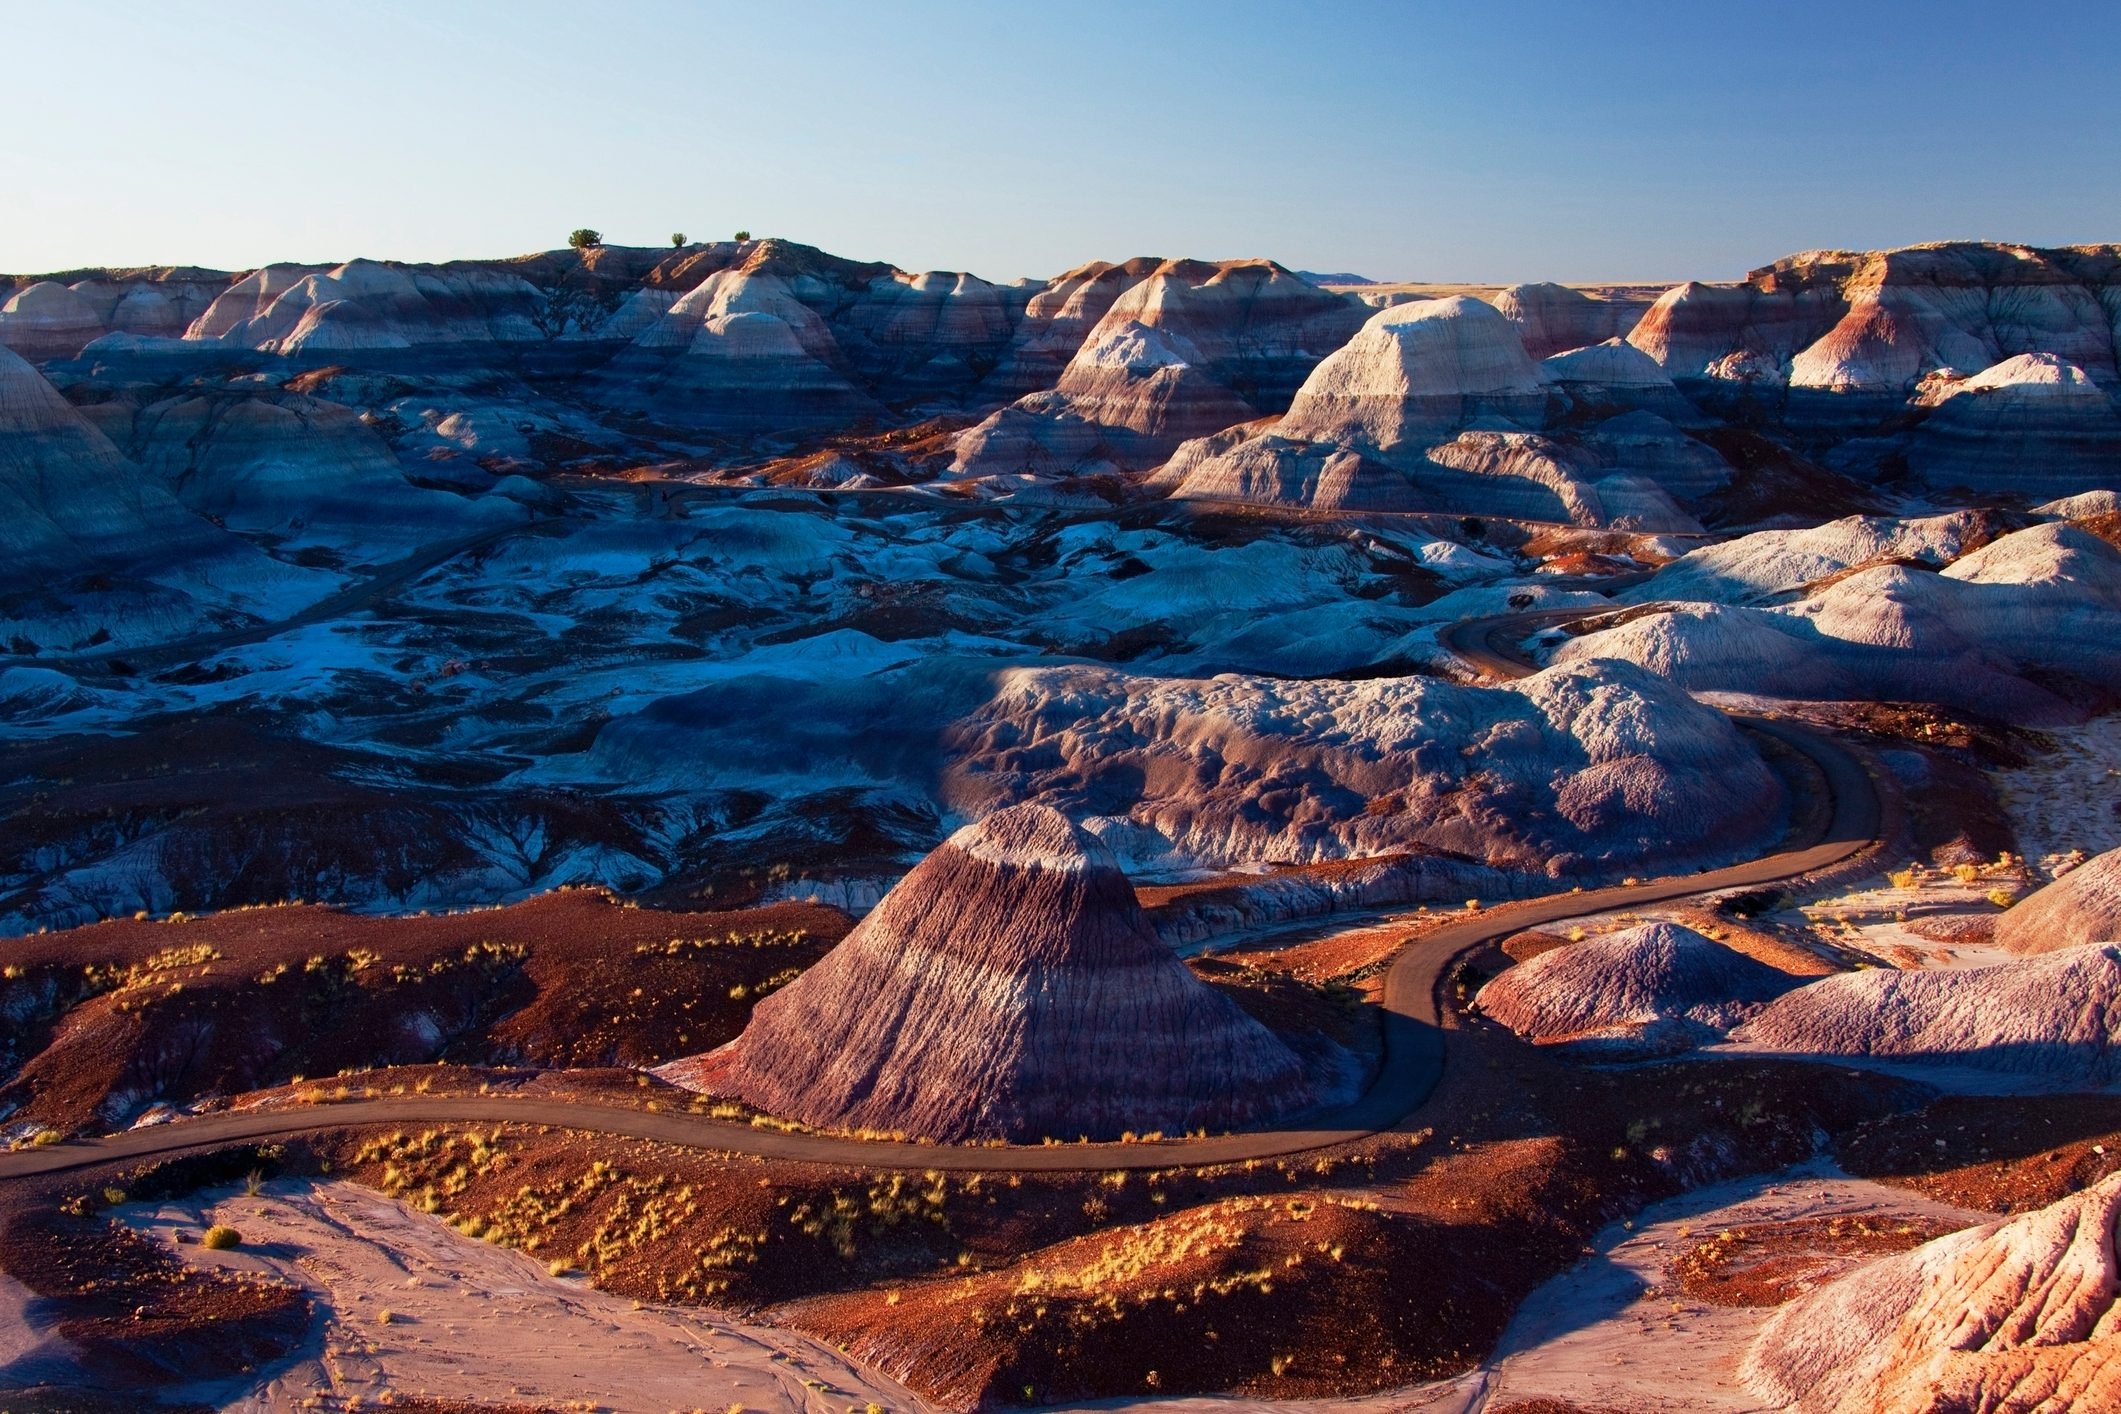 Multicolor rock formations in mountainous remote landscape, Petrified Forest National Park, Arizona, United States